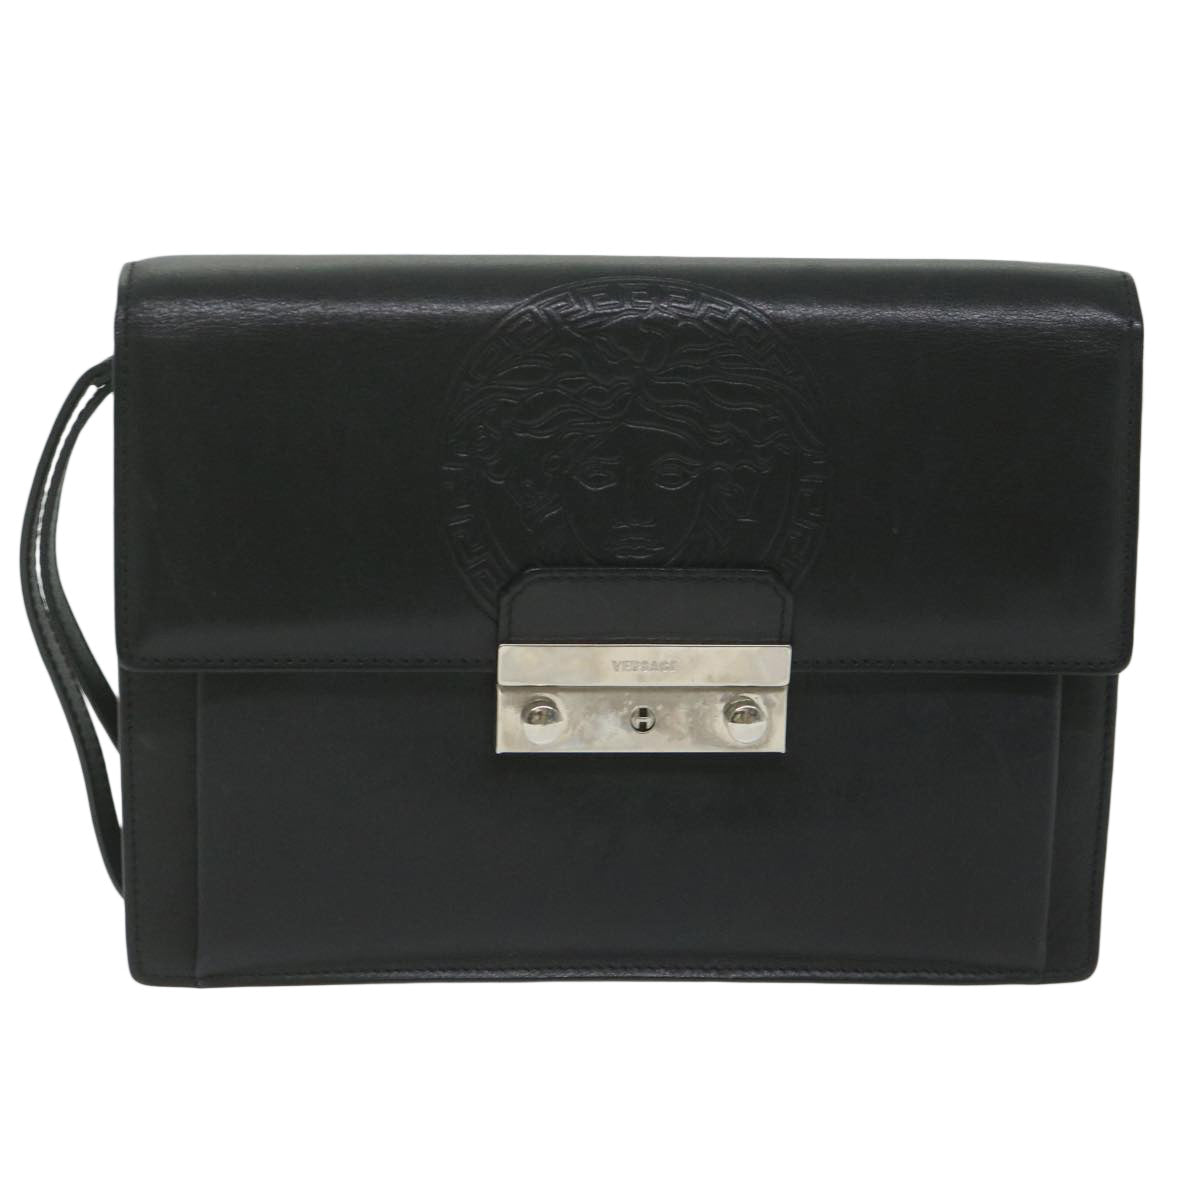 VERSACE Clutch Bag Leather Black Auth bs11246